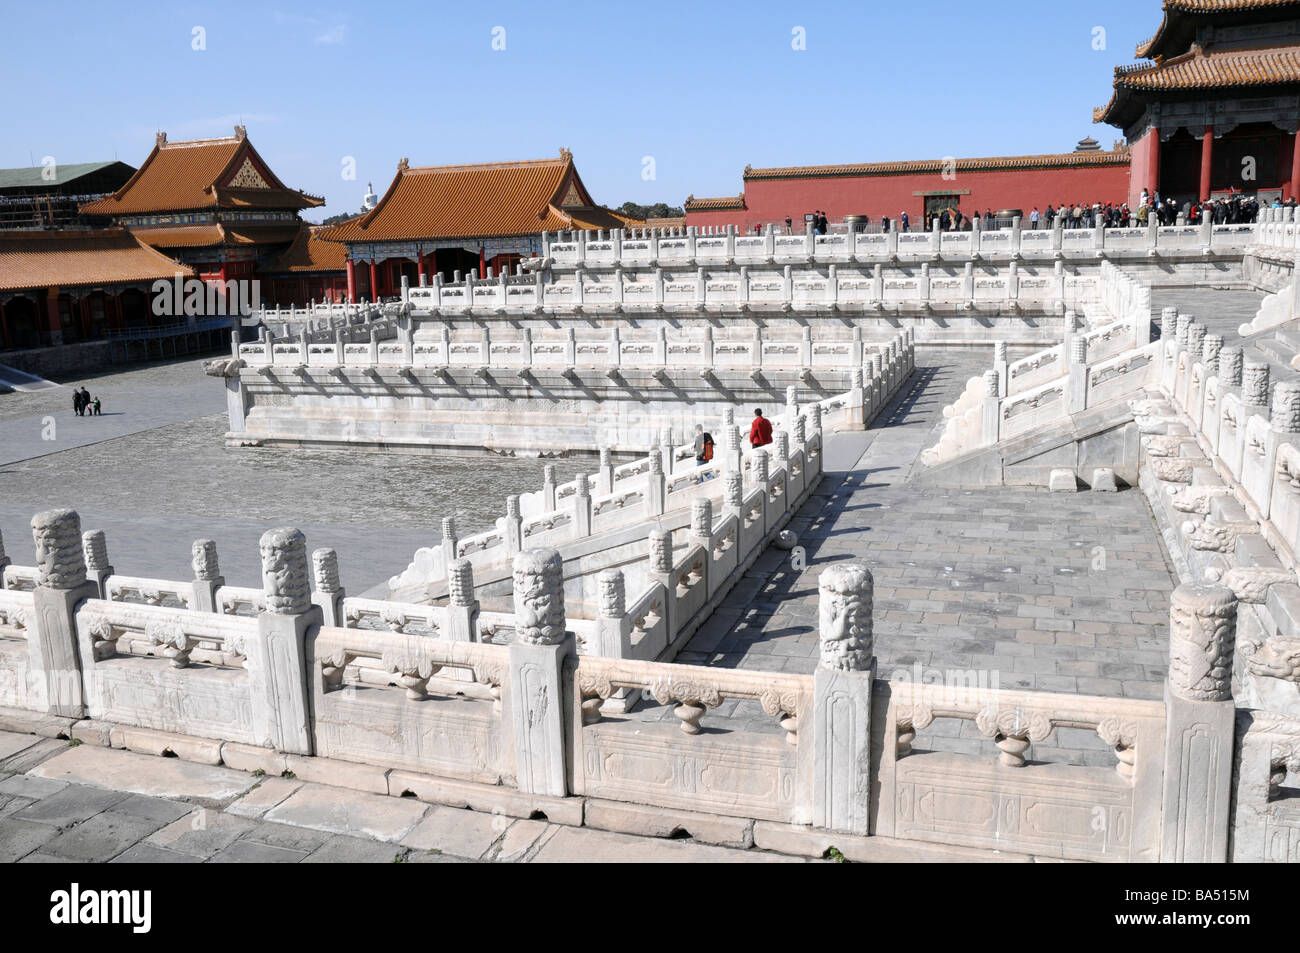 Marble balustrades in The Forbidden City, Beijing, China. Stock Photo